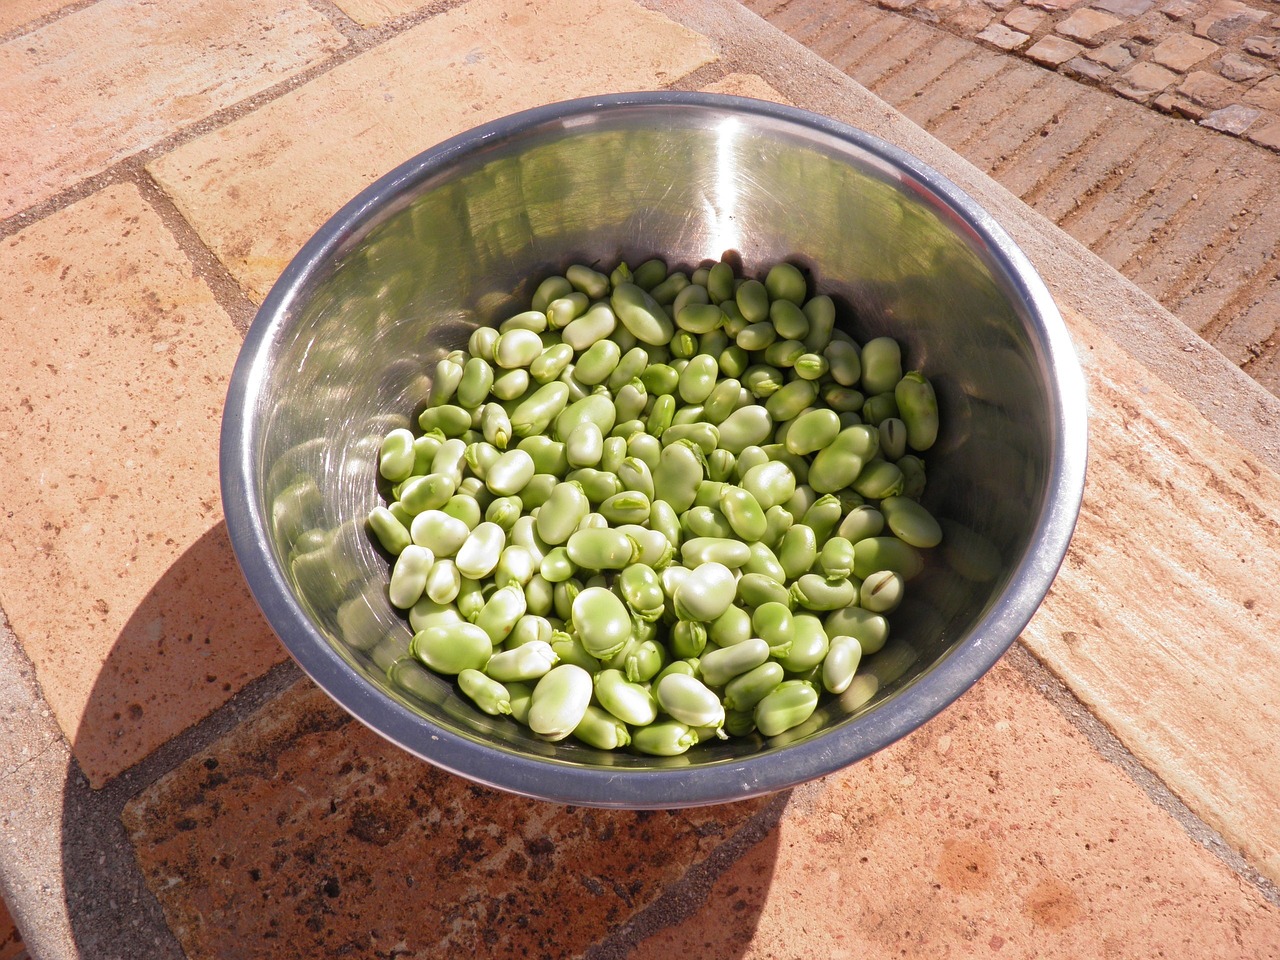 broad beans in a bowl placed in the sunlight